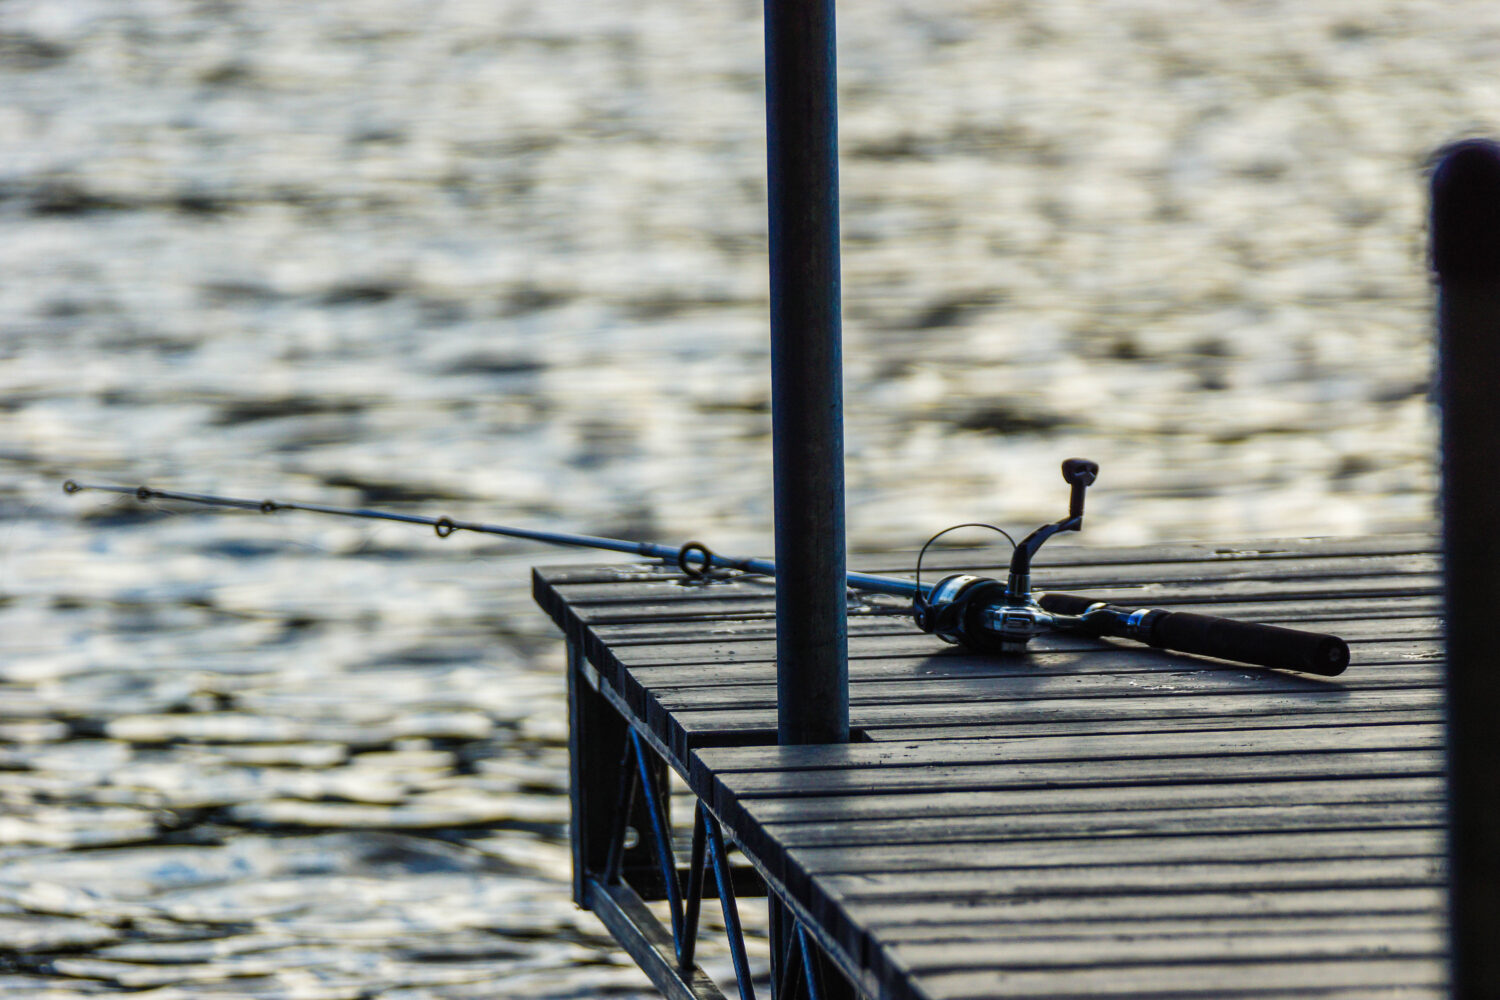 Lake service providers reminded to take AIS prevention steps when installing docks and lifts this spring